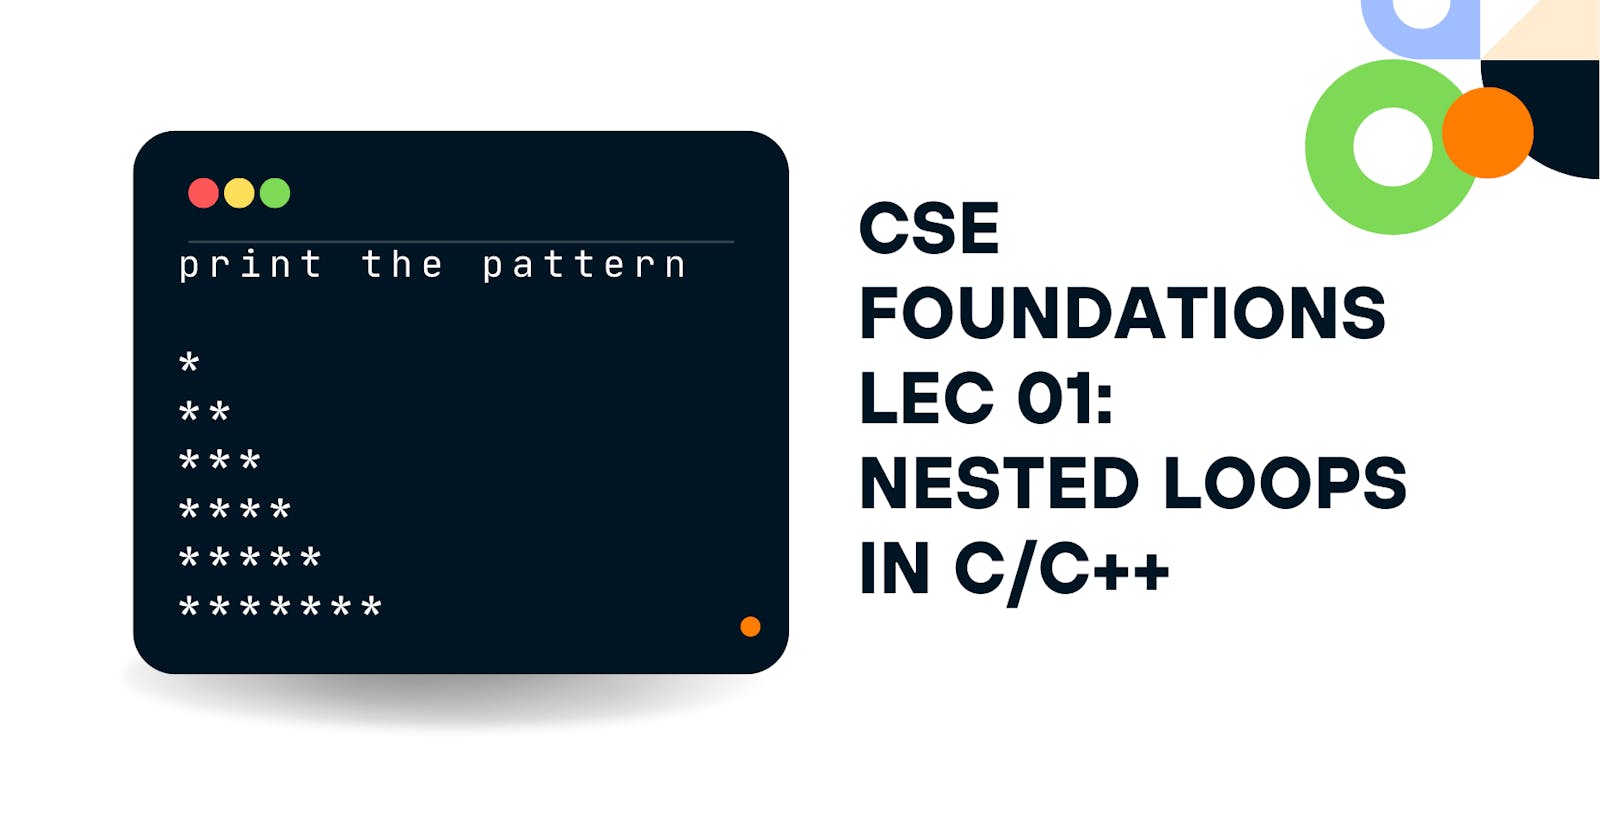 CS Foundations : Nested Loops Patterns using C++ (A short guide to help you get familiar with the concept of nested loops)